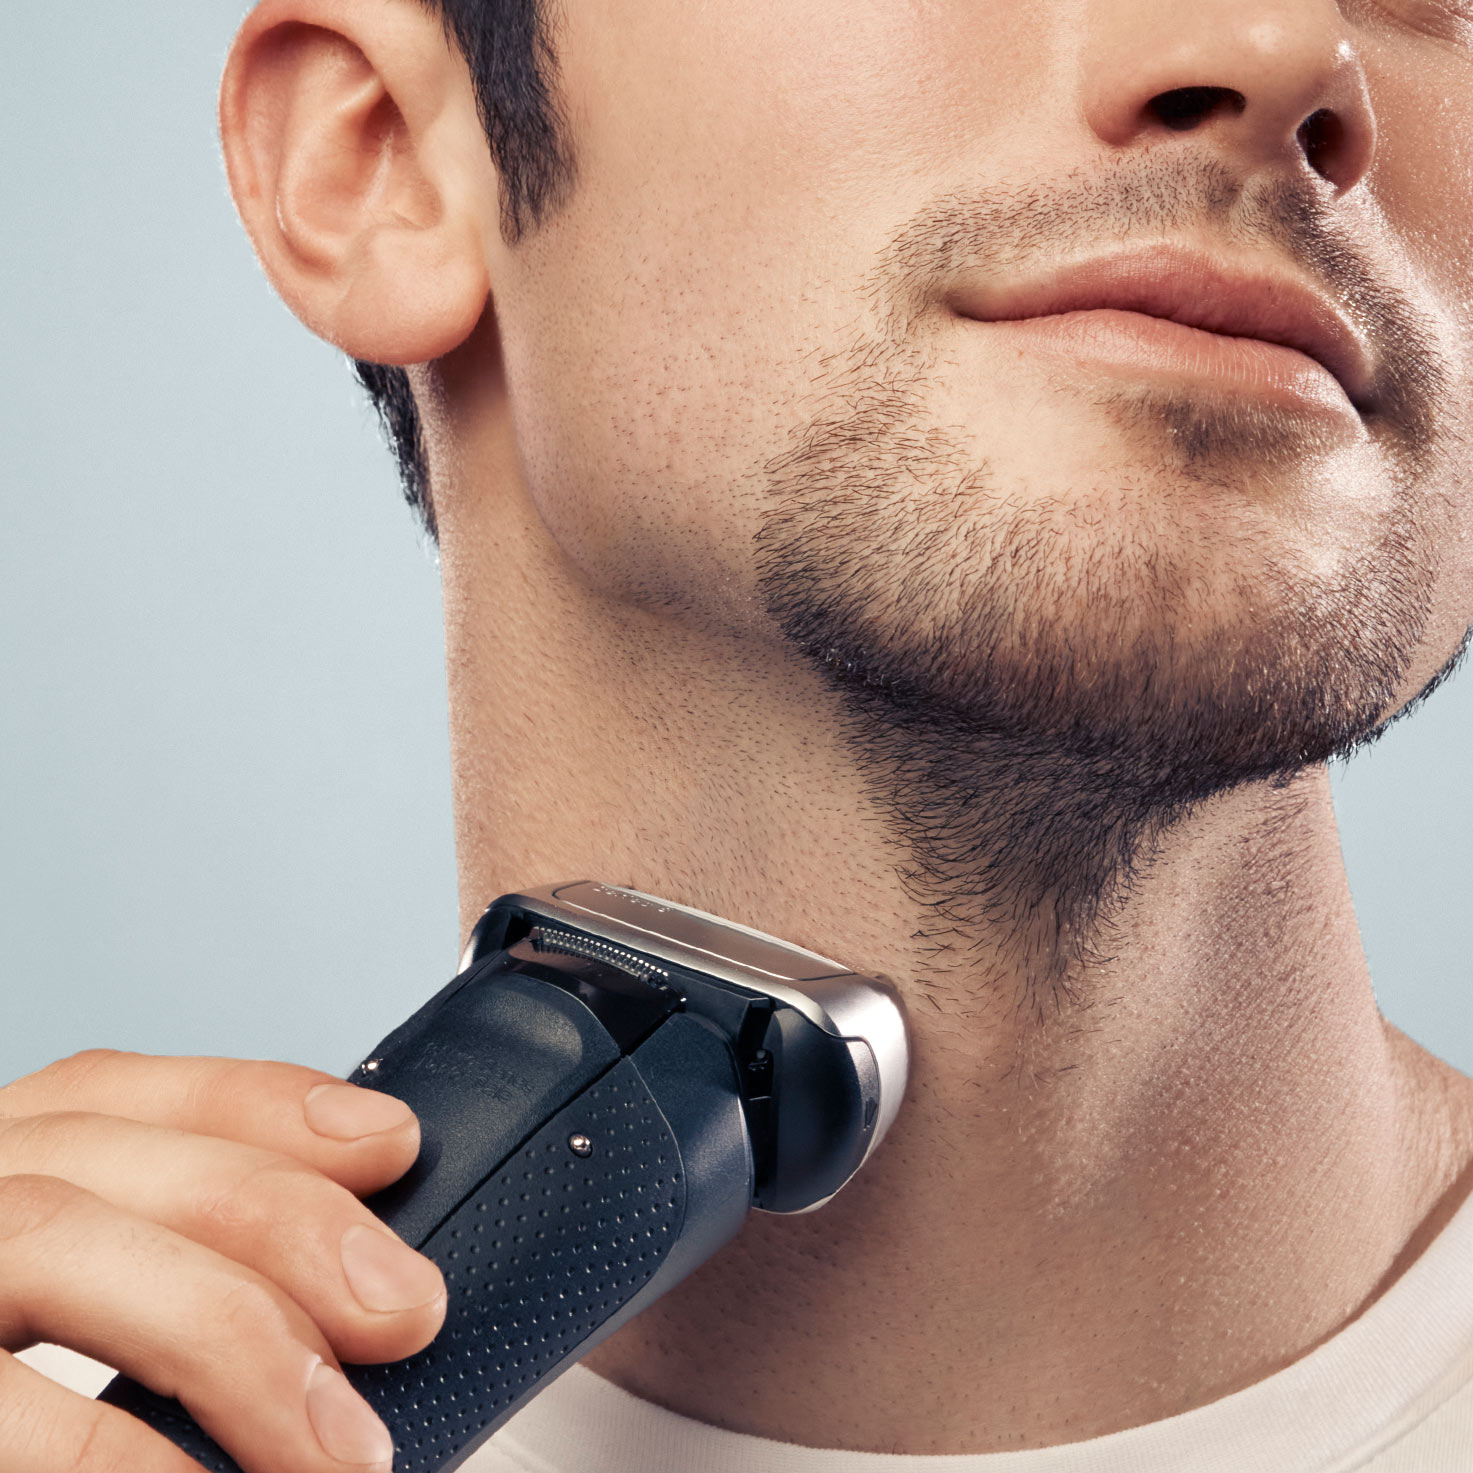 Powerful, yet gentle shave—even on dense beards